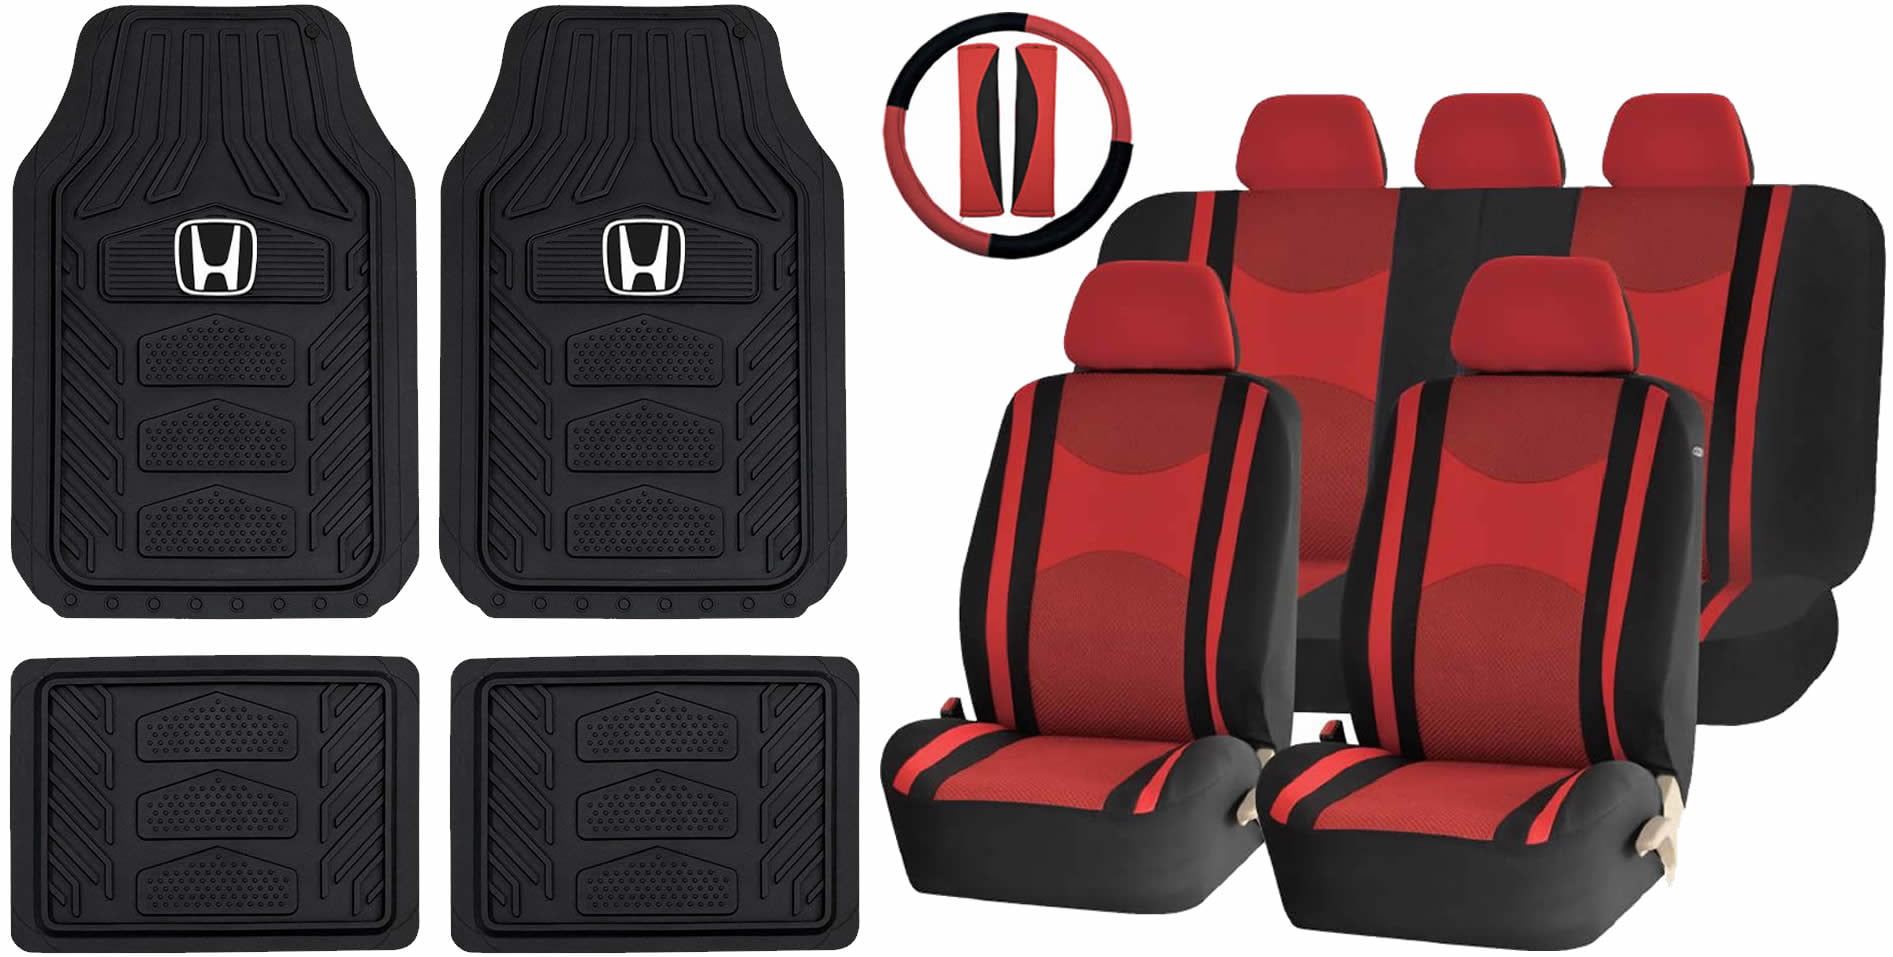 UAA All Weather SUV Rubber Mats /& Dual-Stitch Racing Polyester Seat Covers Set